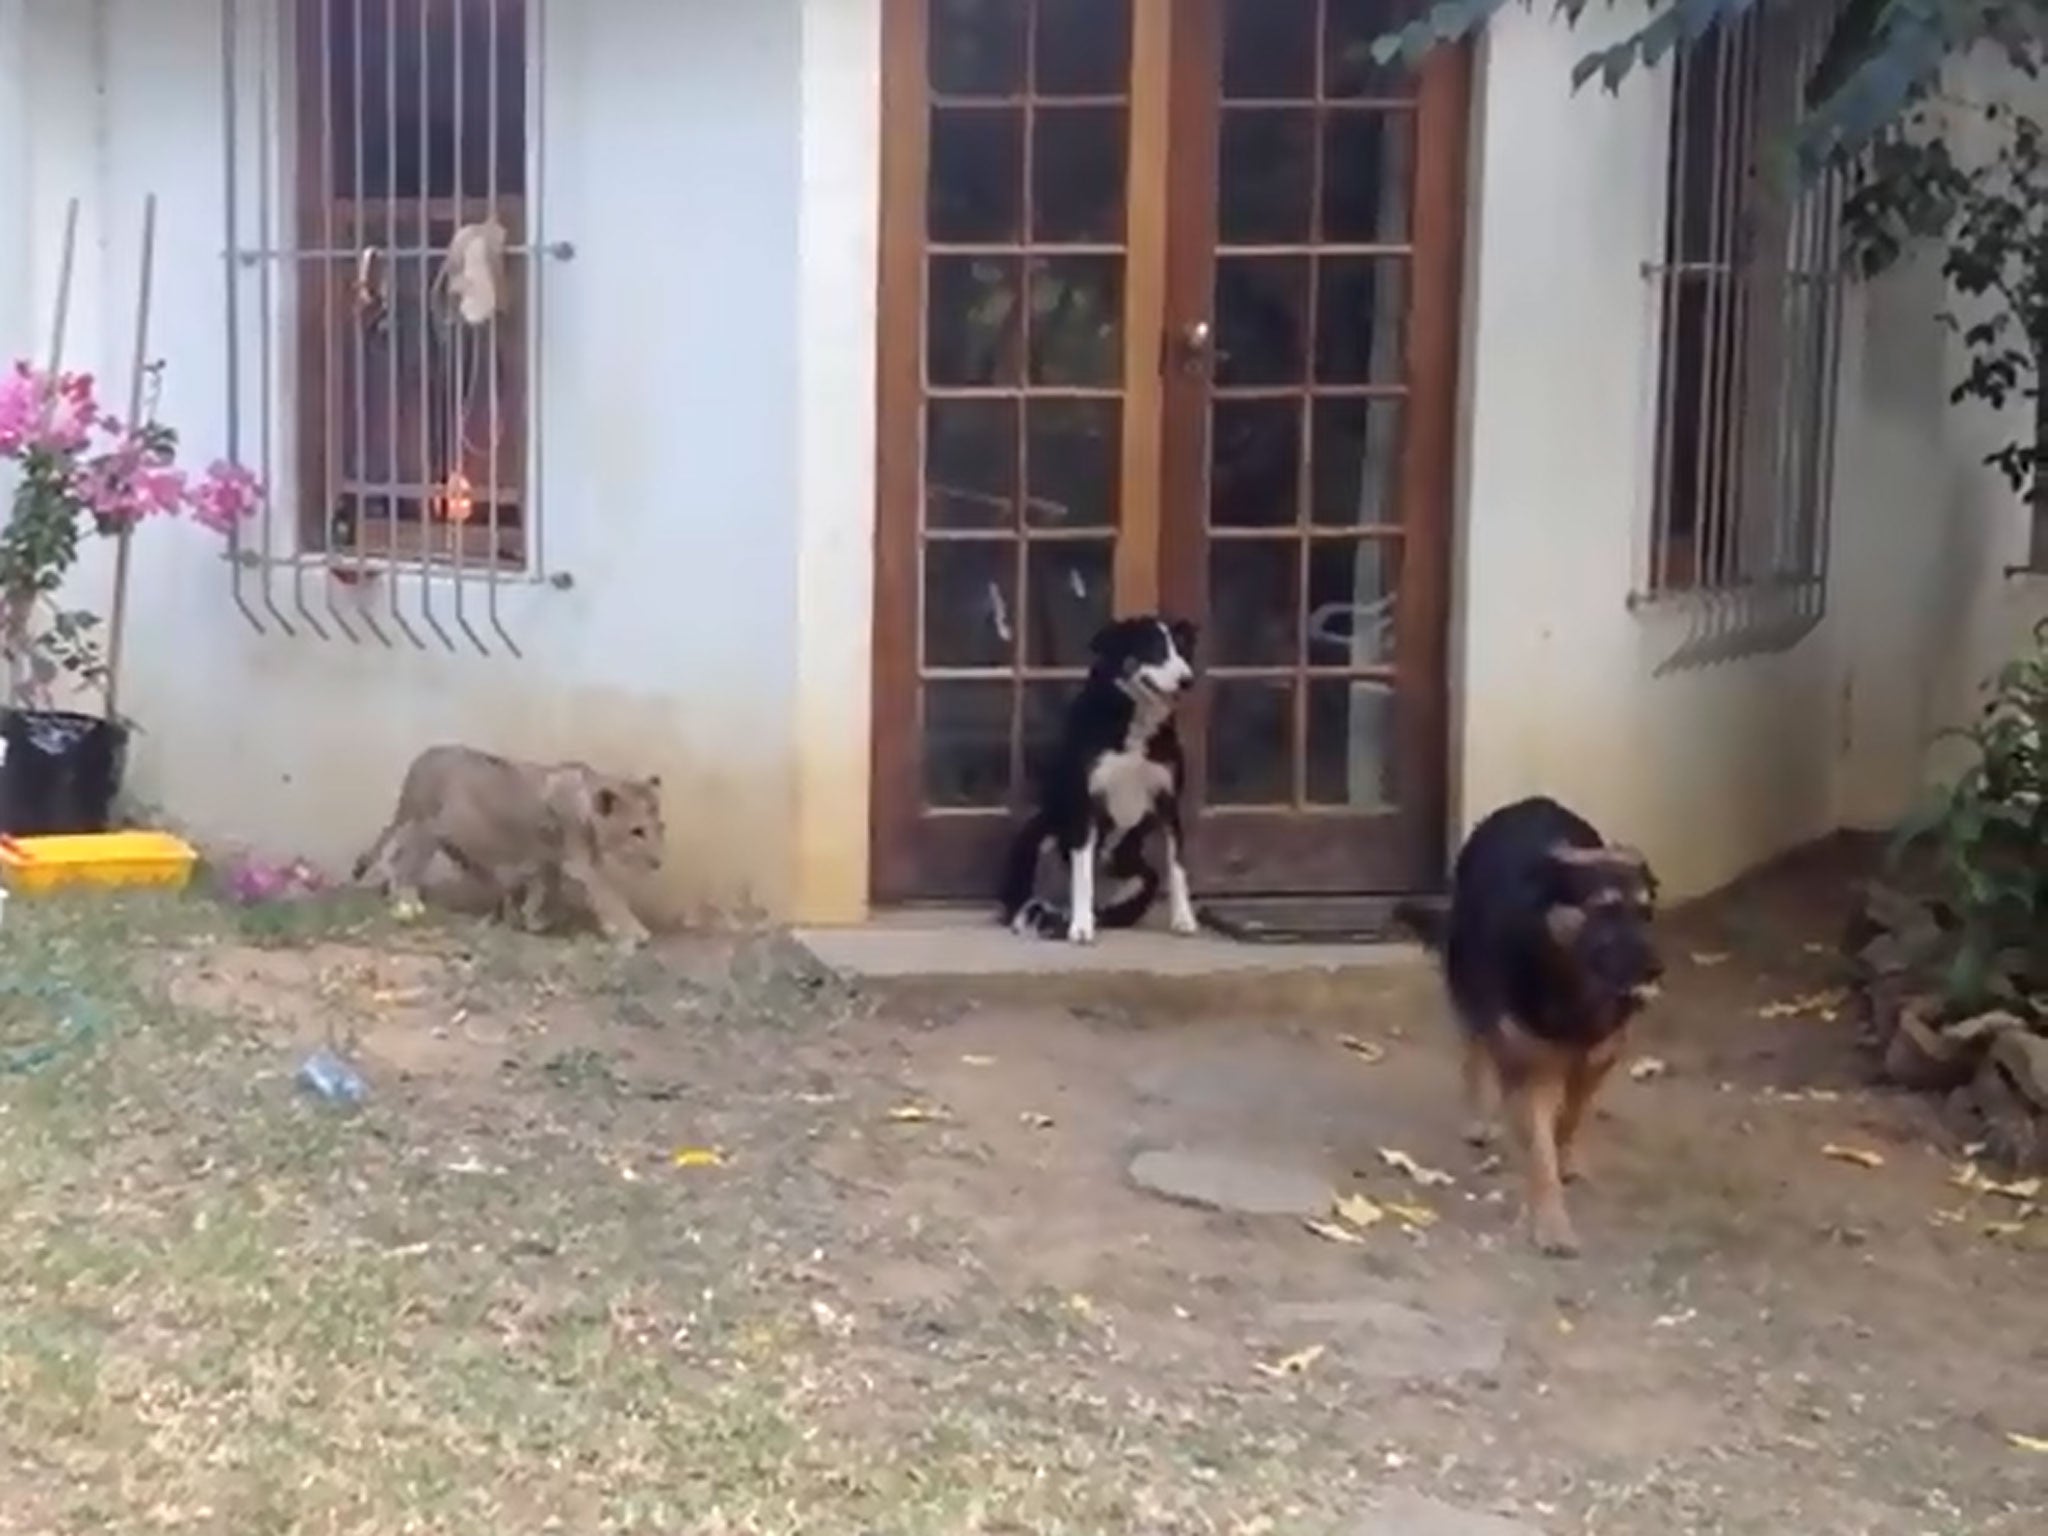 A lion spooks a dog at a farm in South Africa